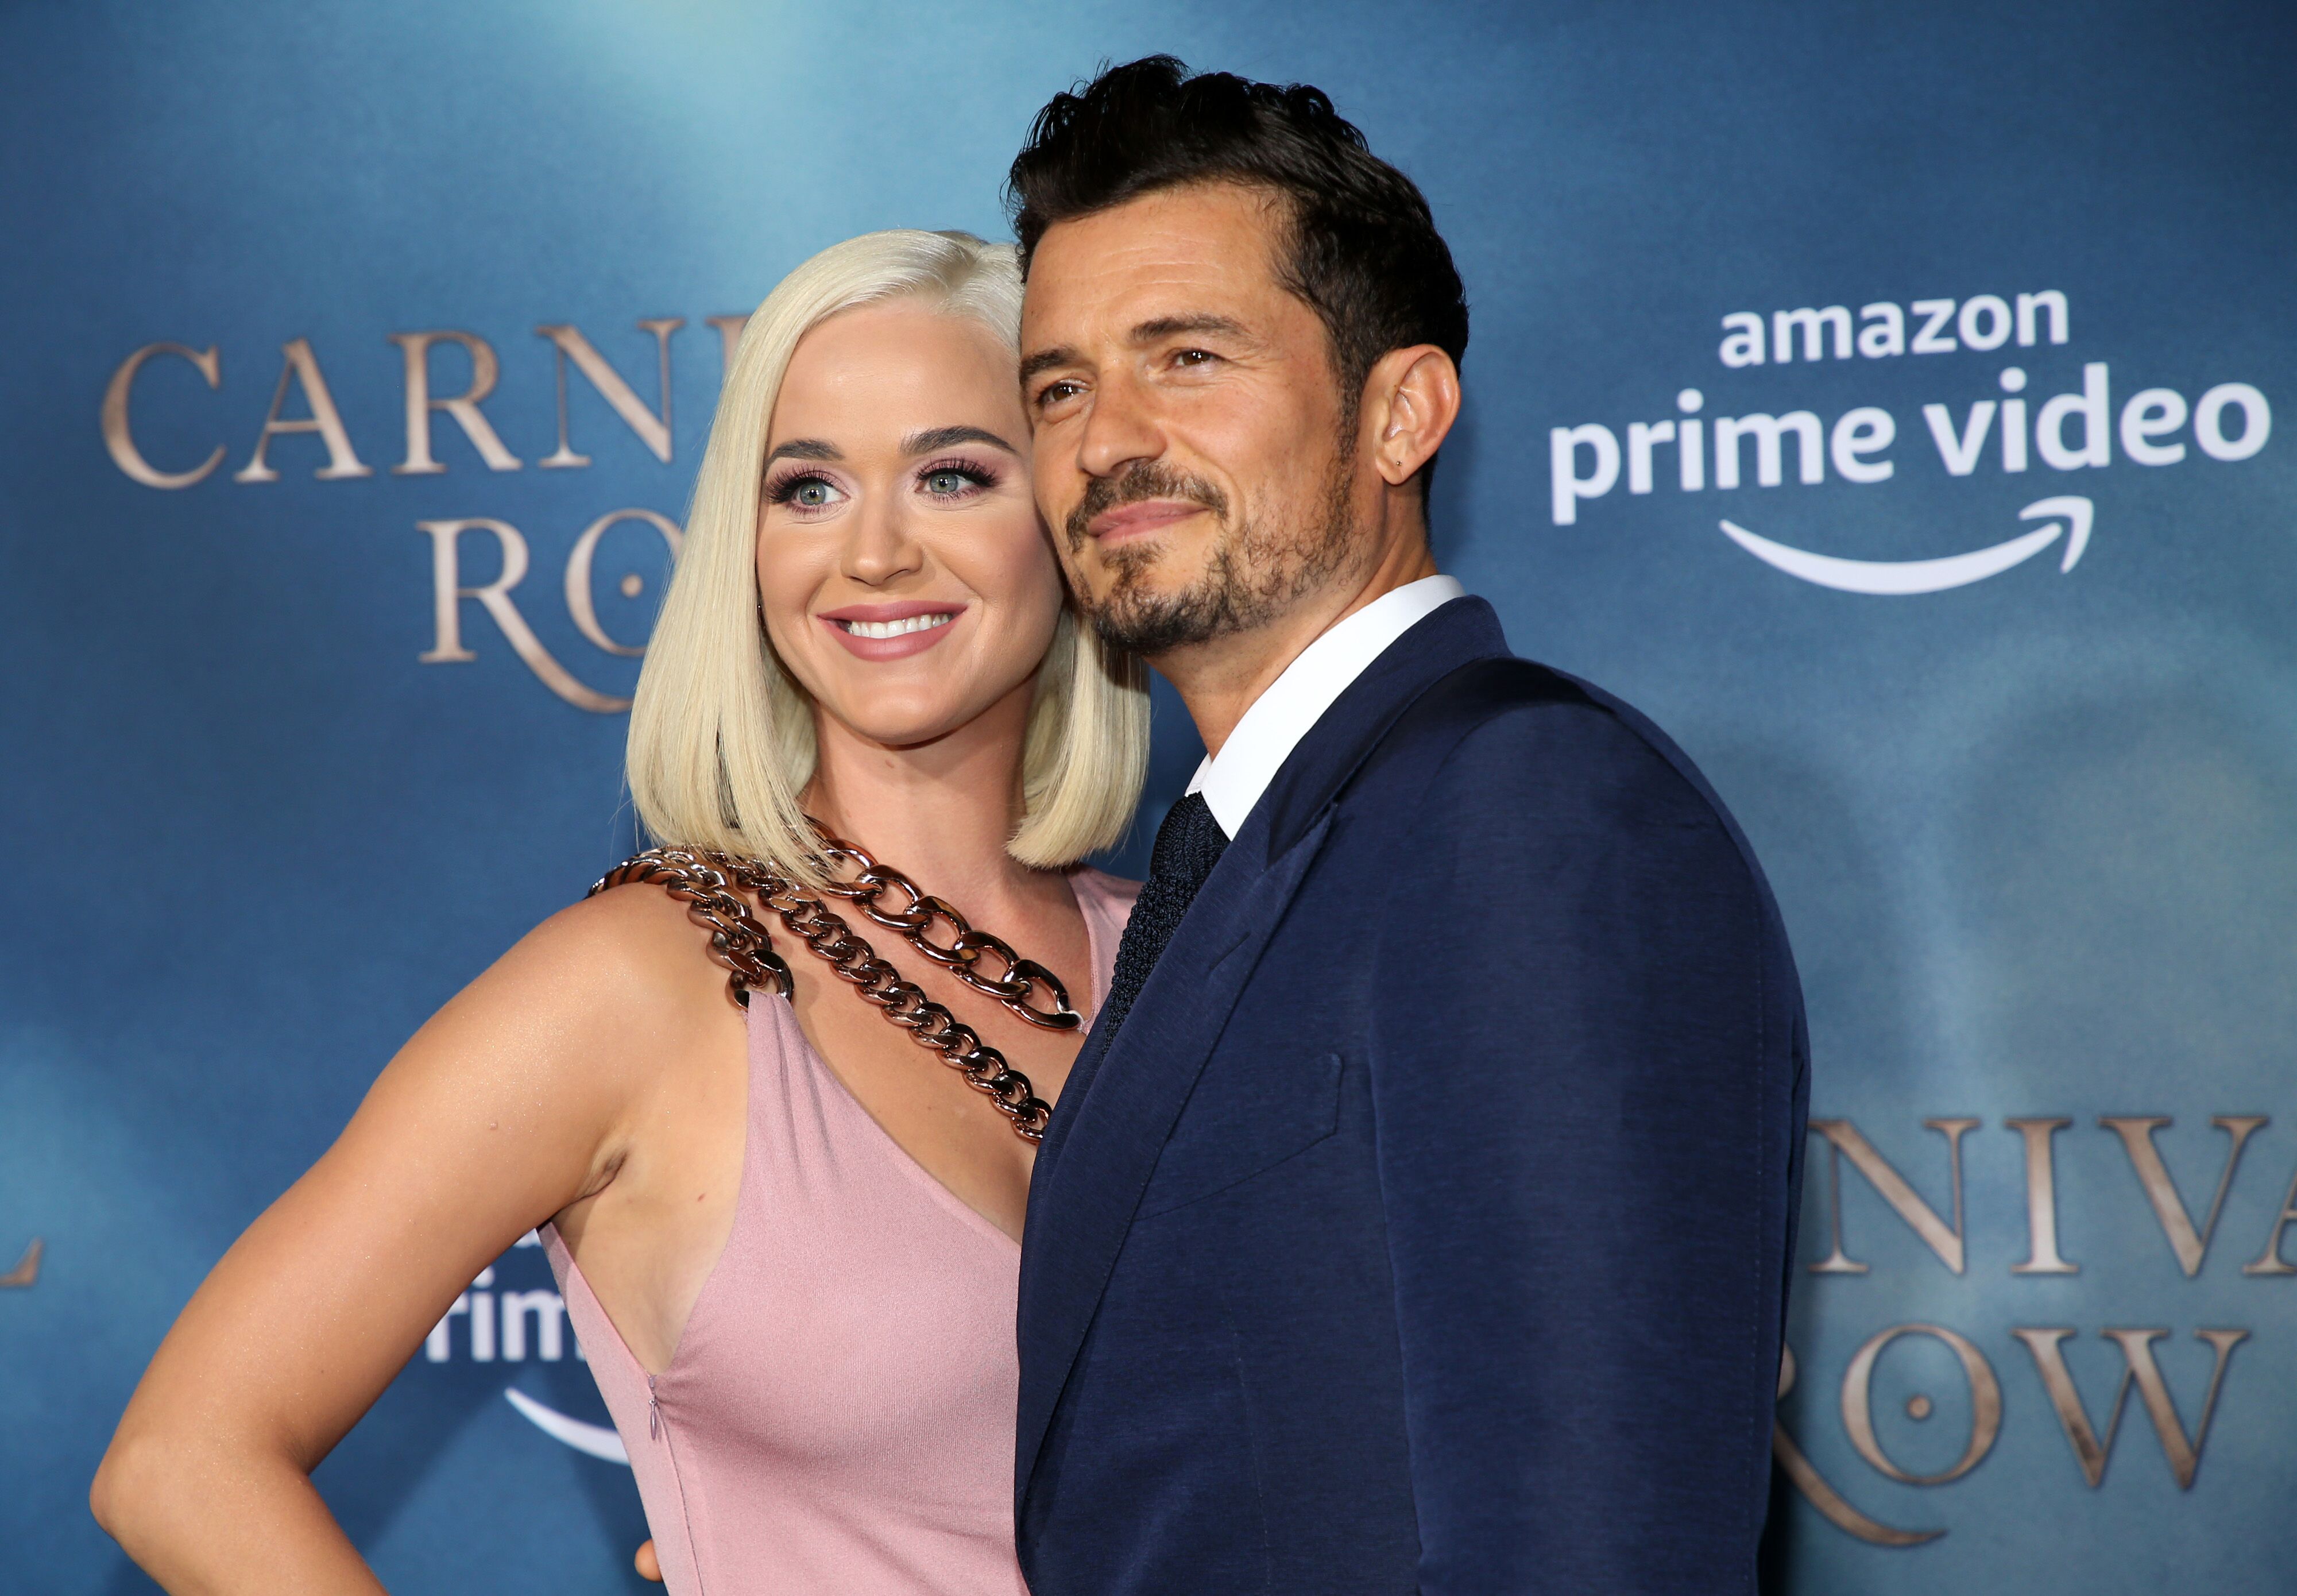 Katy Perry and Orlando Bloom attend the LA premiere of Amazon's "Carnival Row" at TCL Chinese Theatre on August 21, 2019 | Photo: Getty Images